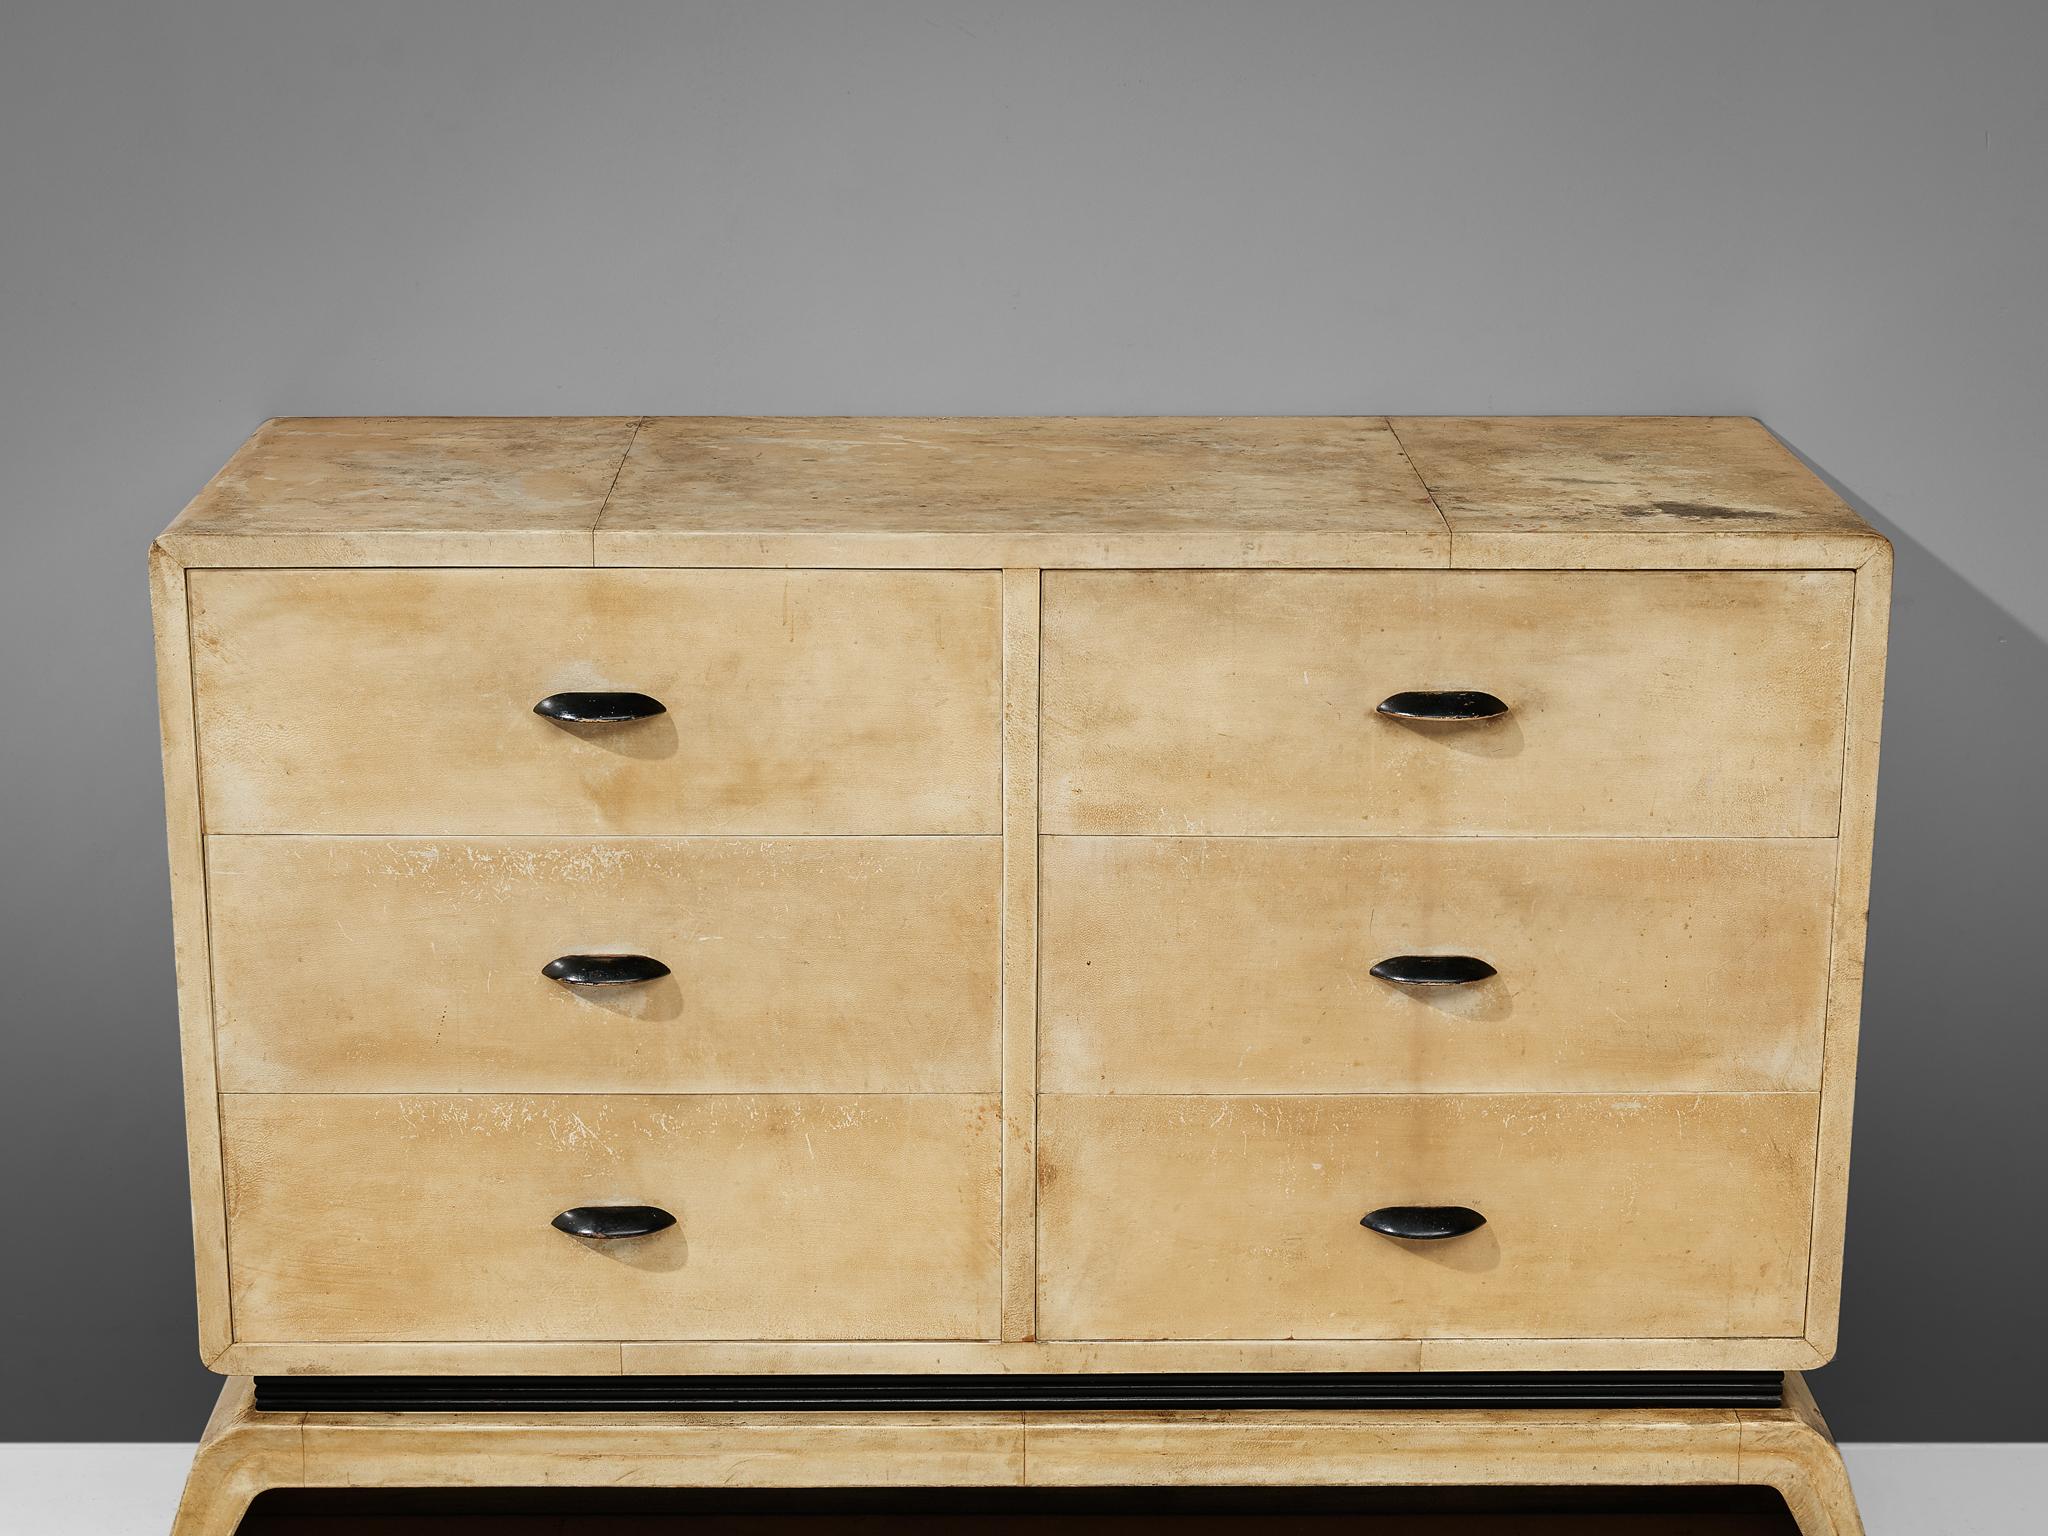 Rare Valzania Sideboard with Drawers in Parchment For Sale 1